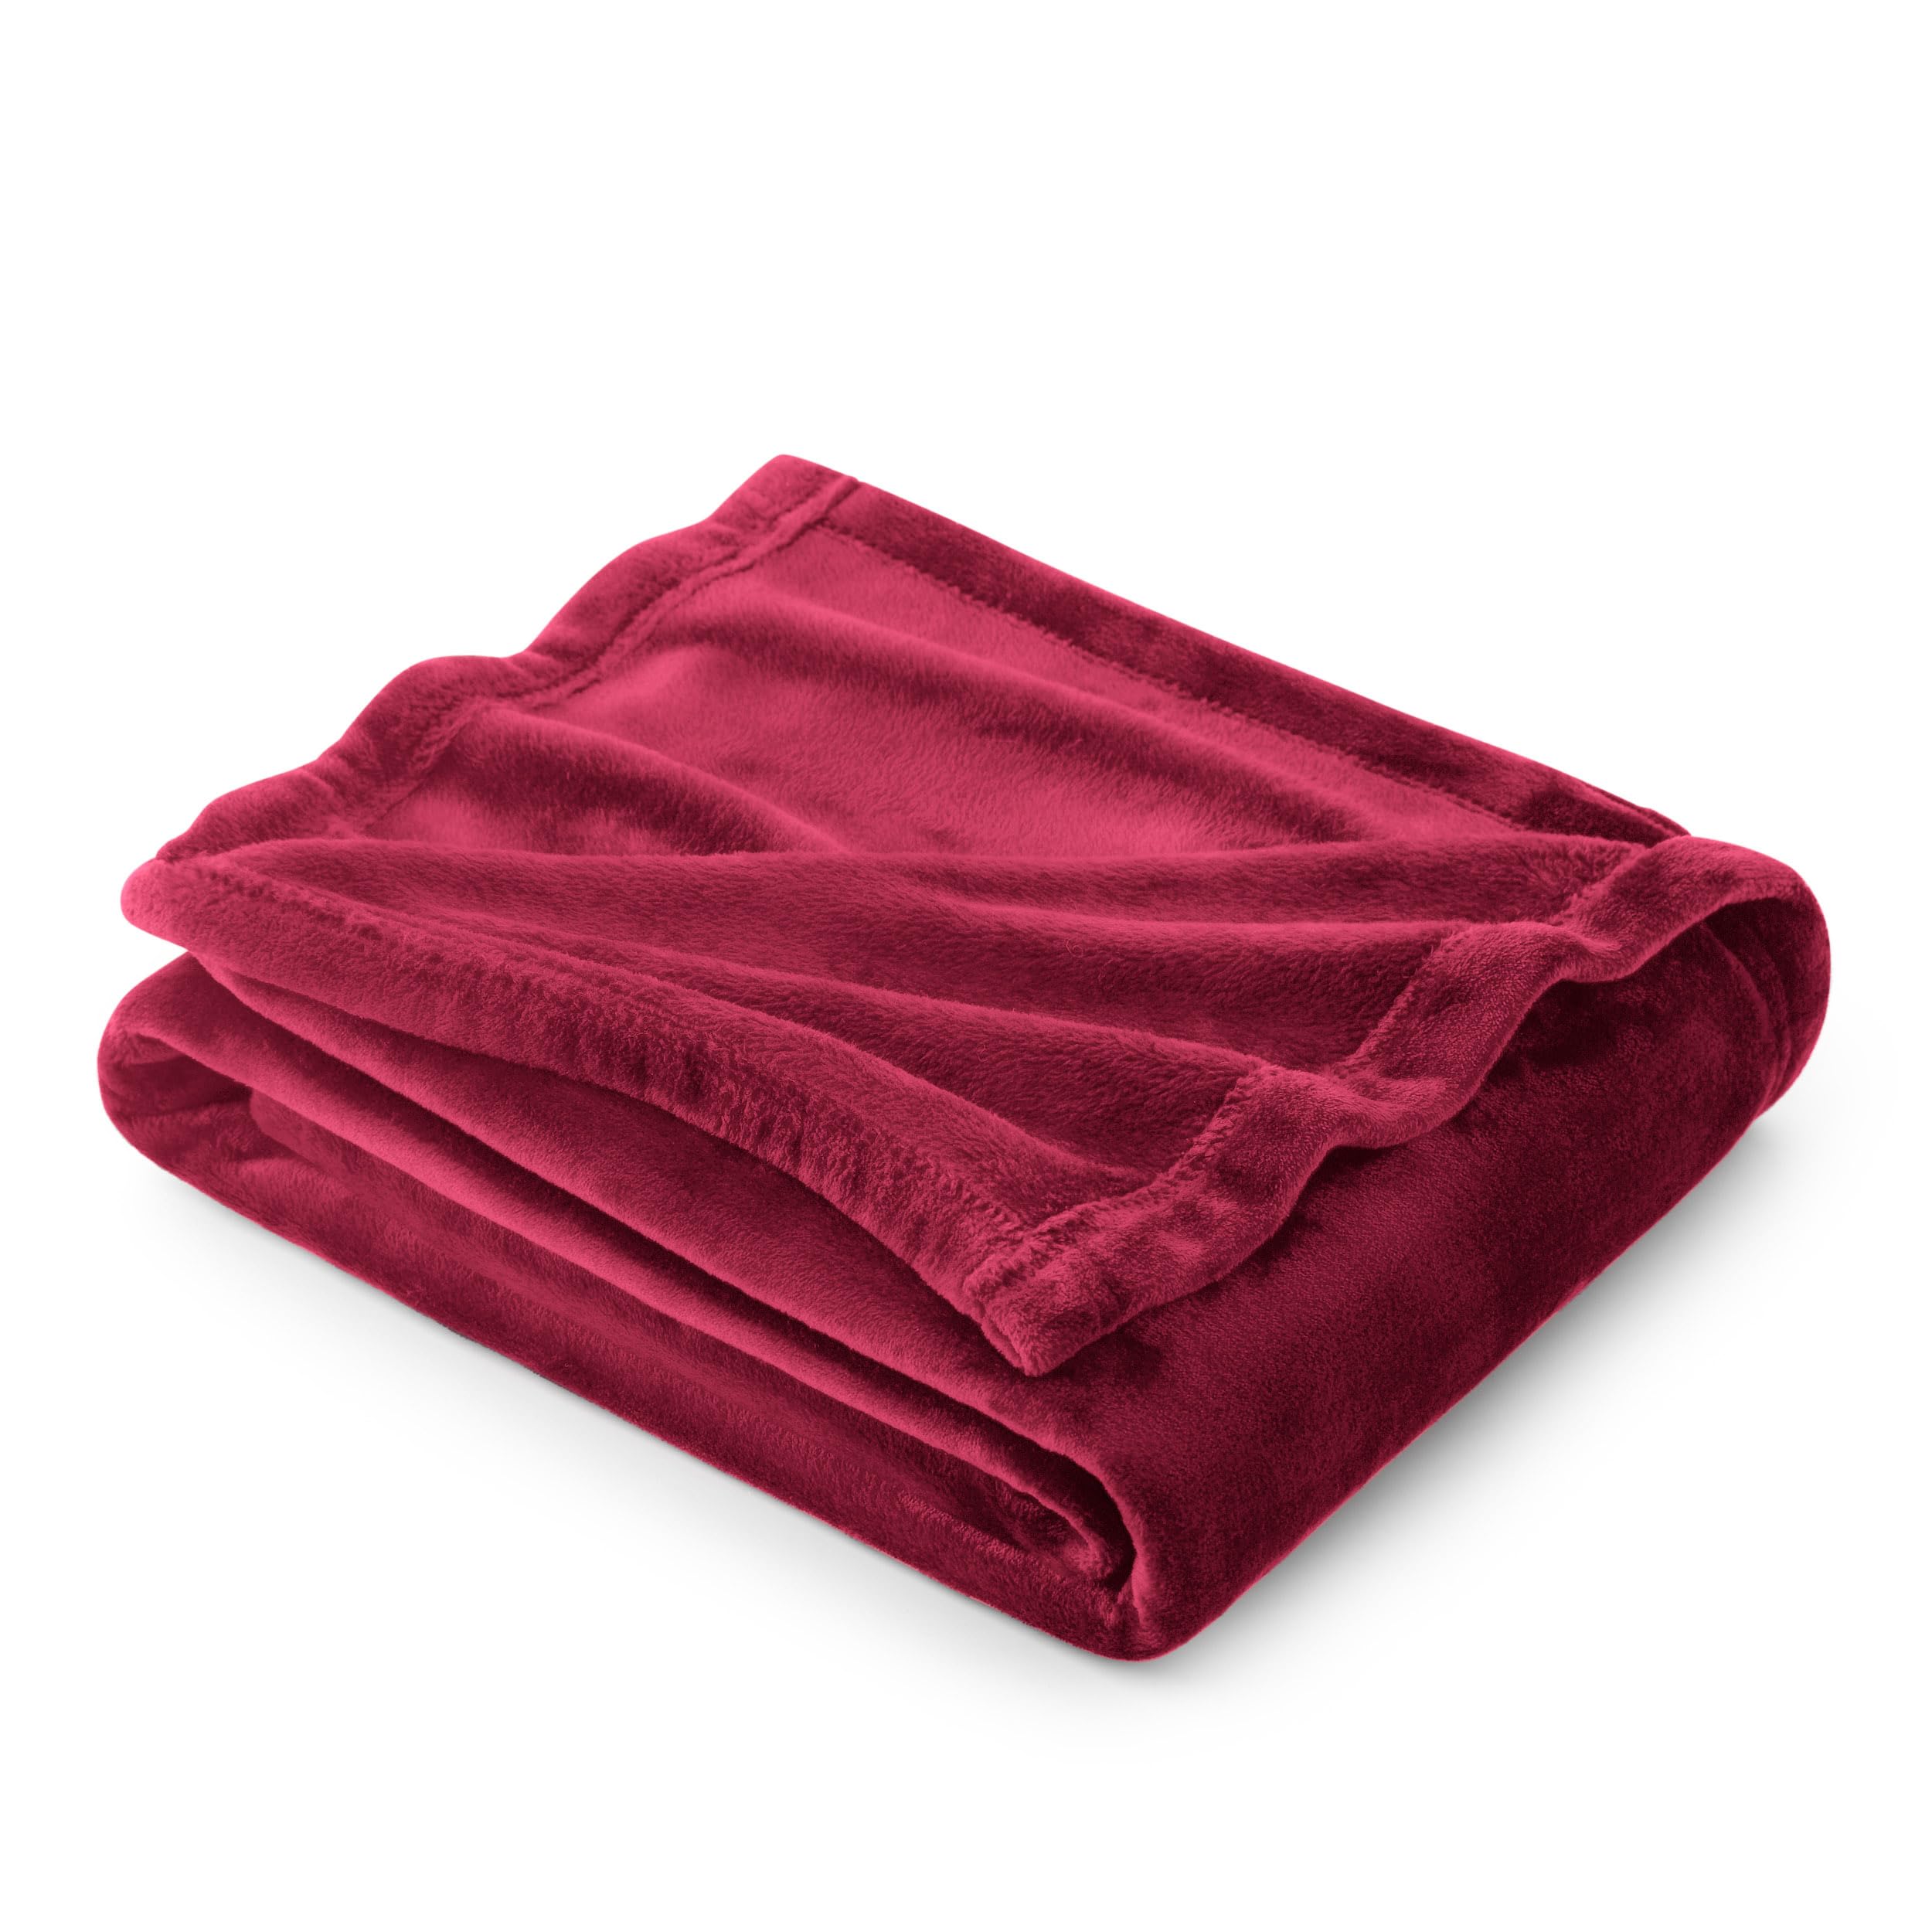 Book Cover Bedsure Fleece Blanket Twin Blanket Burgundy - 300GSM Soft Lightweight Plush Cozy Twin Blankets for Bed, Sofa, Couch, Travel, Camping, 60x80 inches